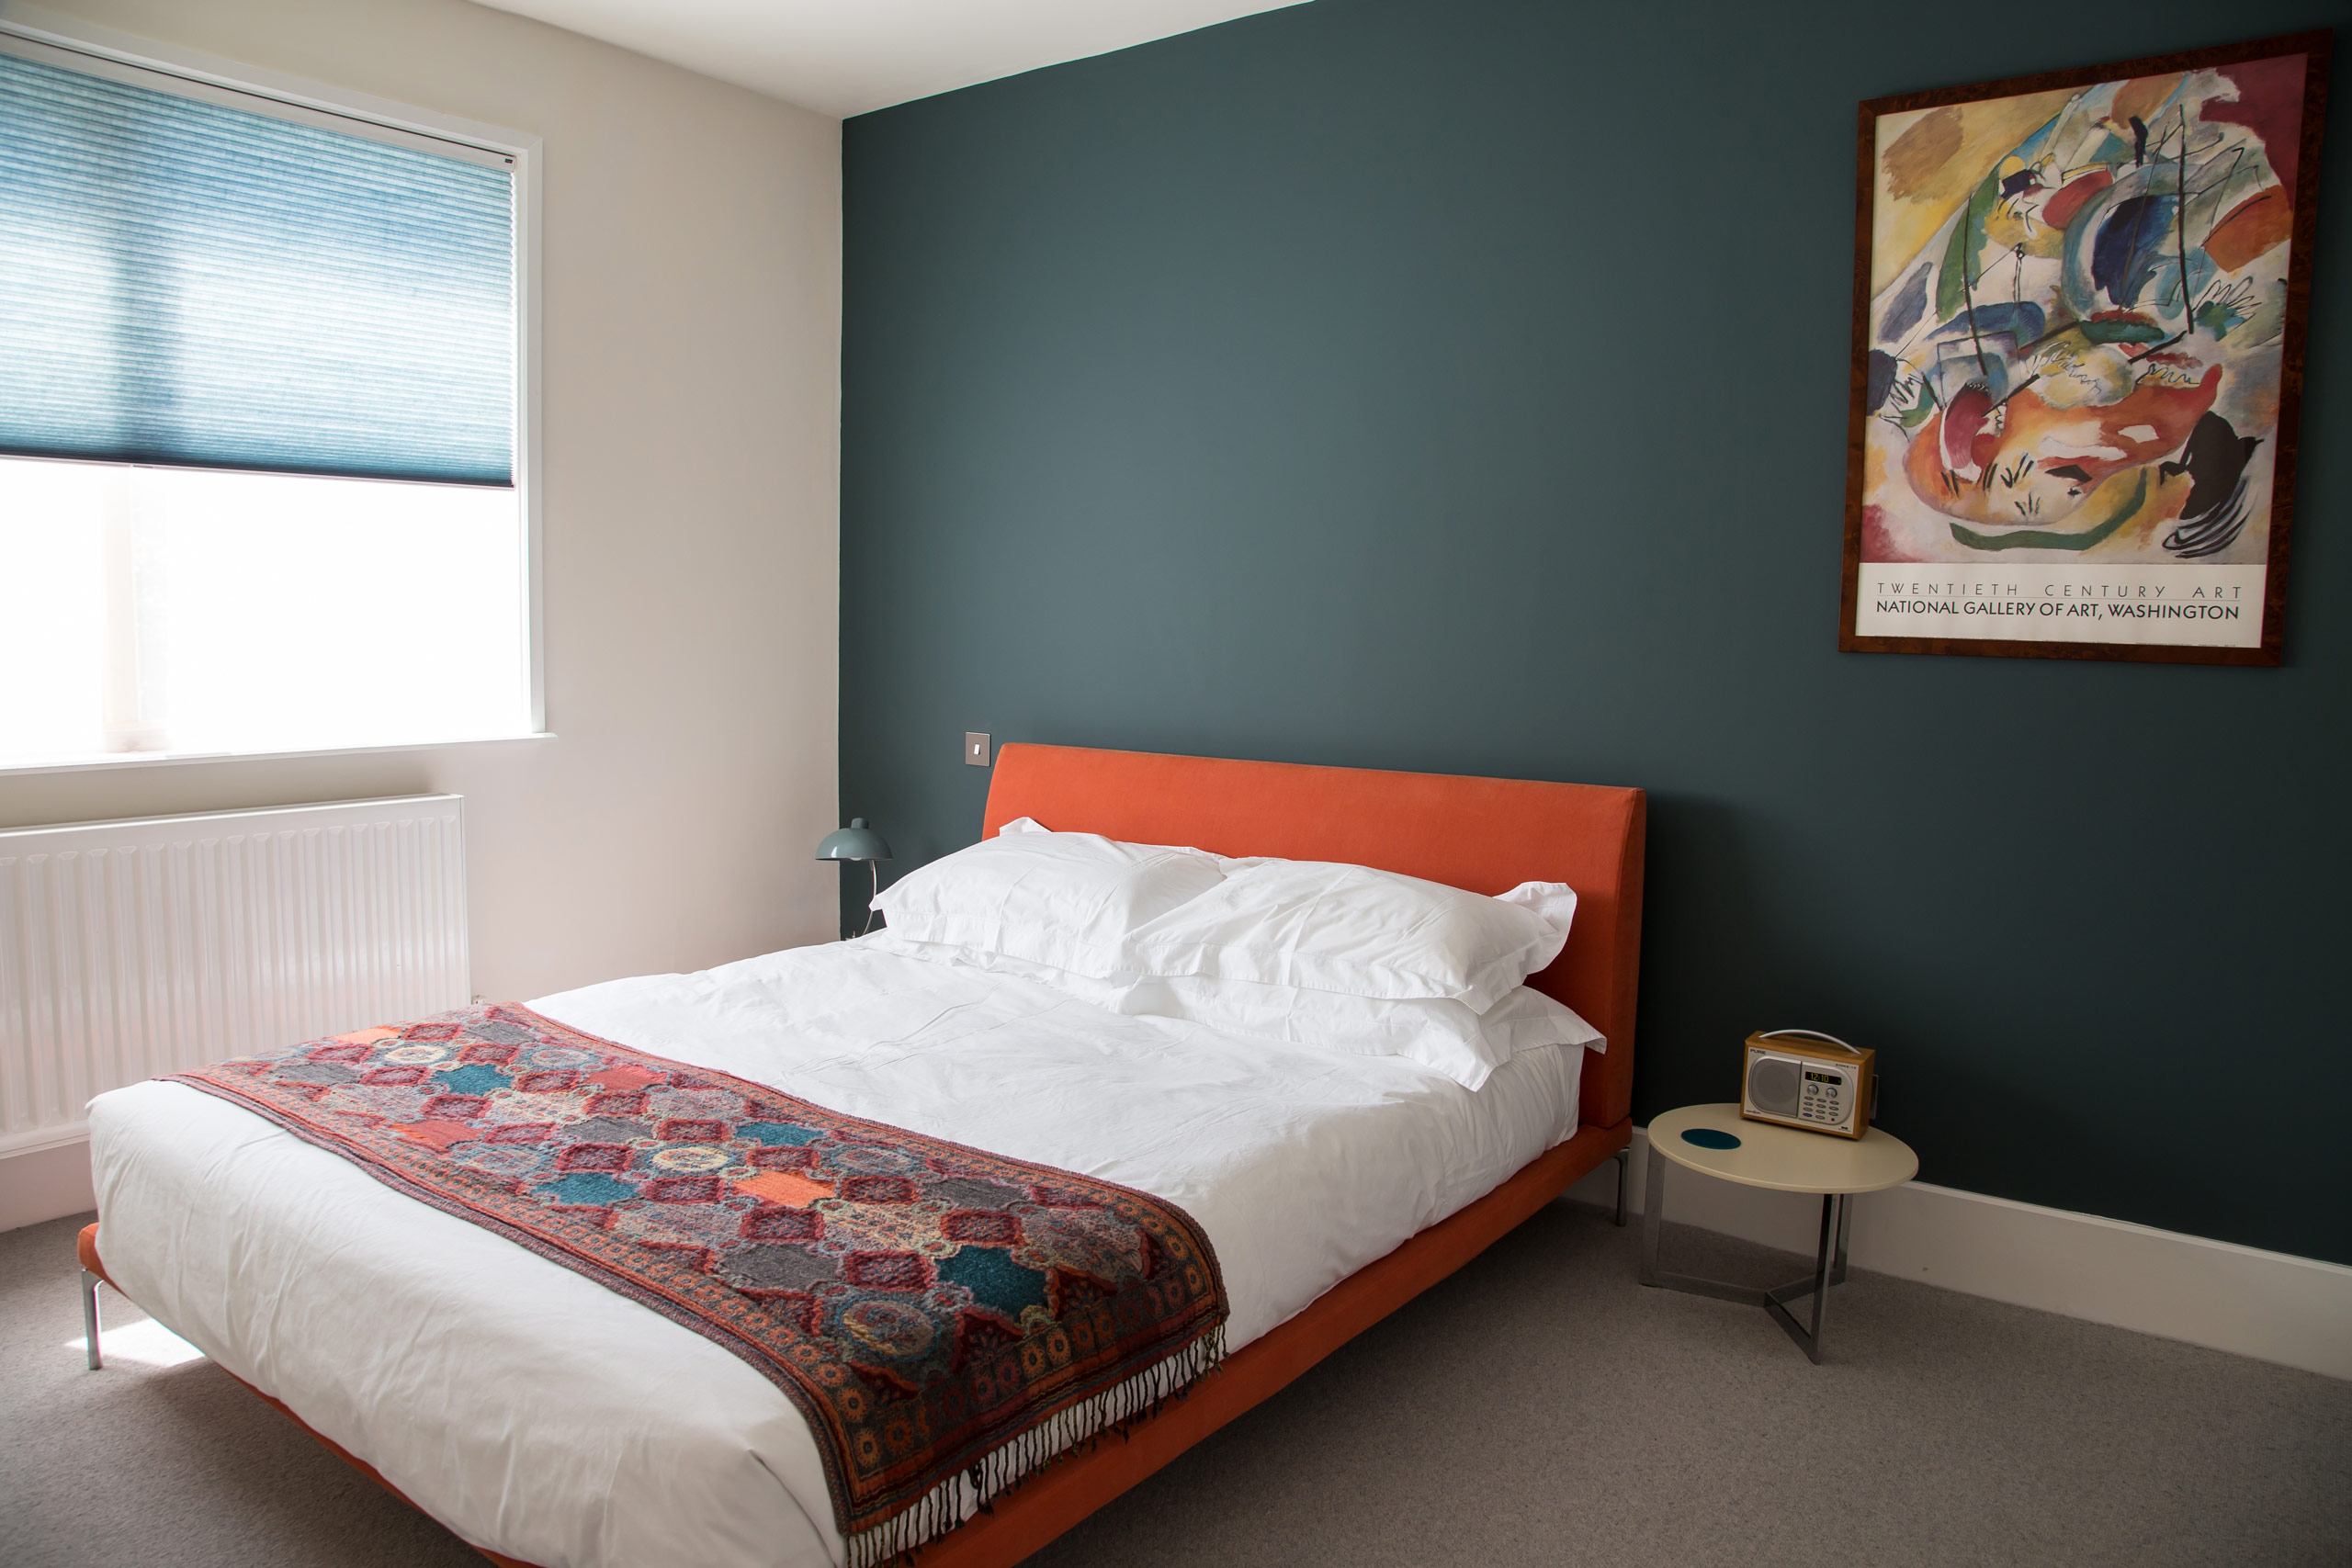 Bedroom with orange upholstered bed and dark wall